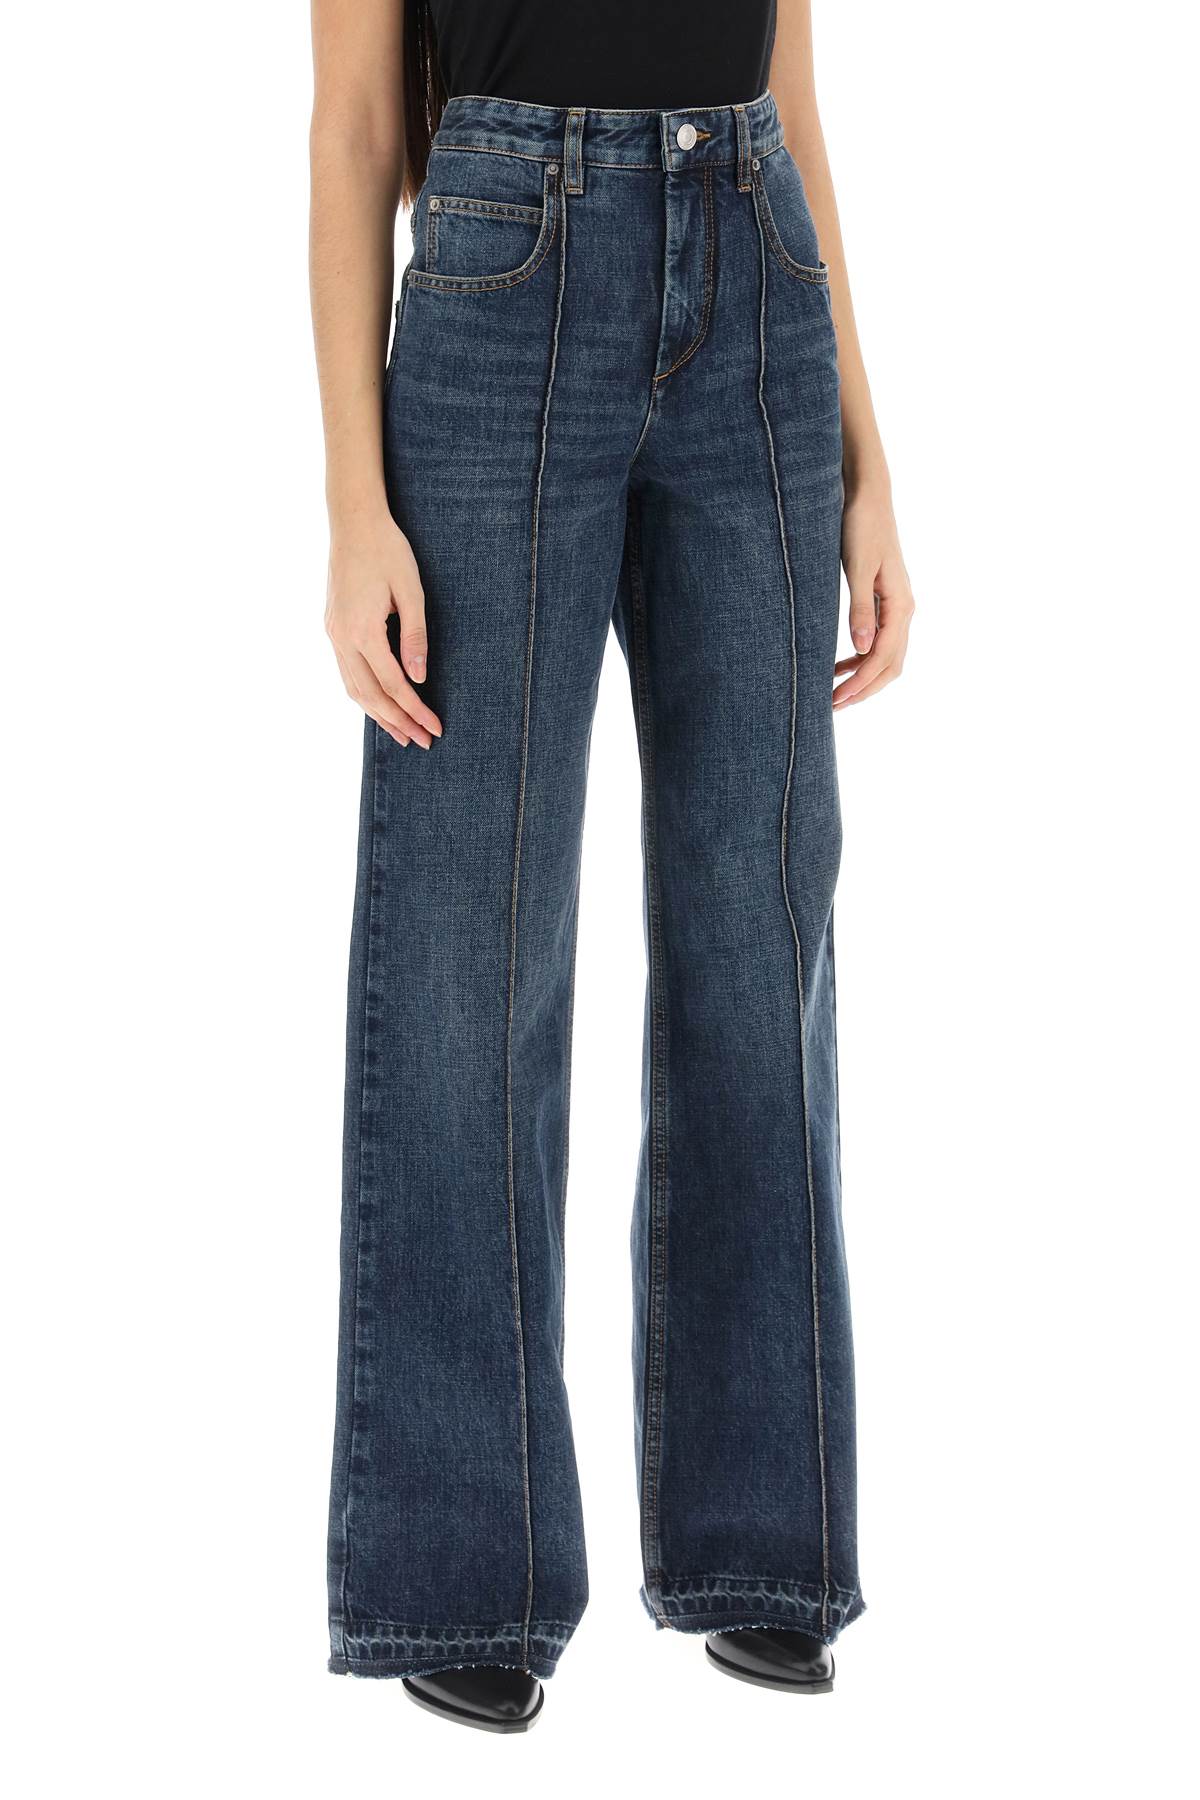 Isabel marant noldy flared jeans-1